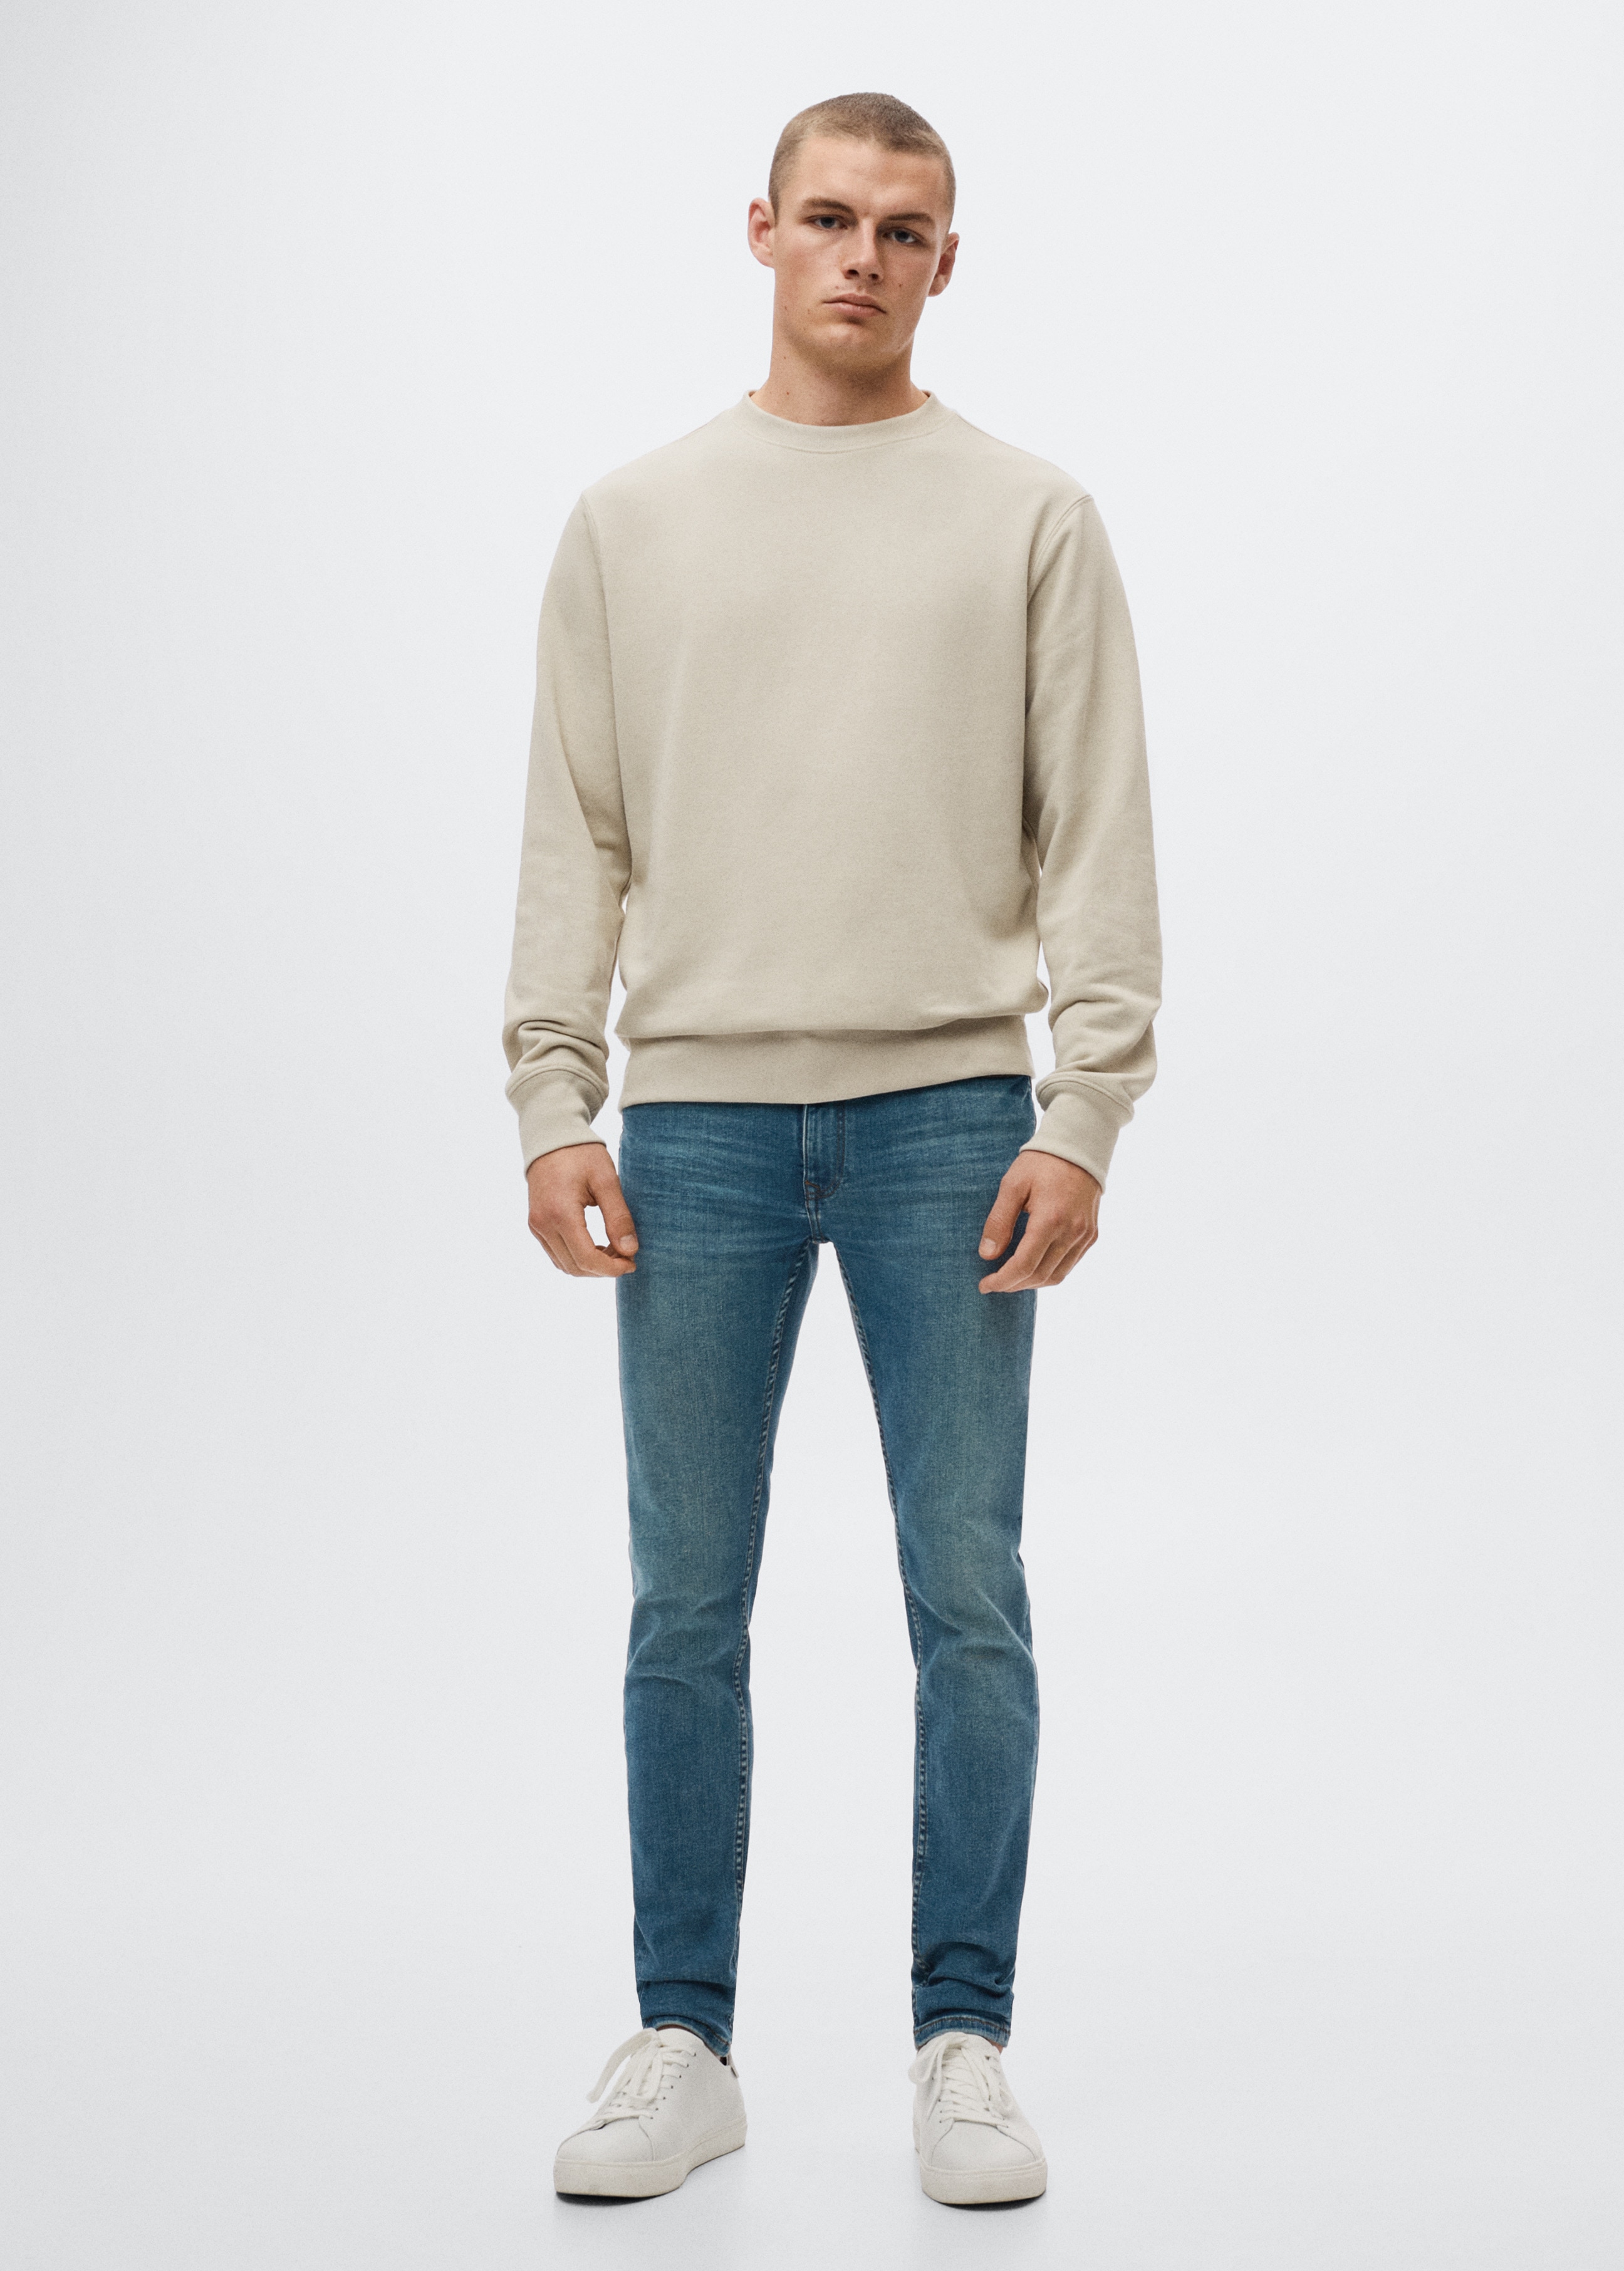 Jeans Jude skinny fit - Plano general